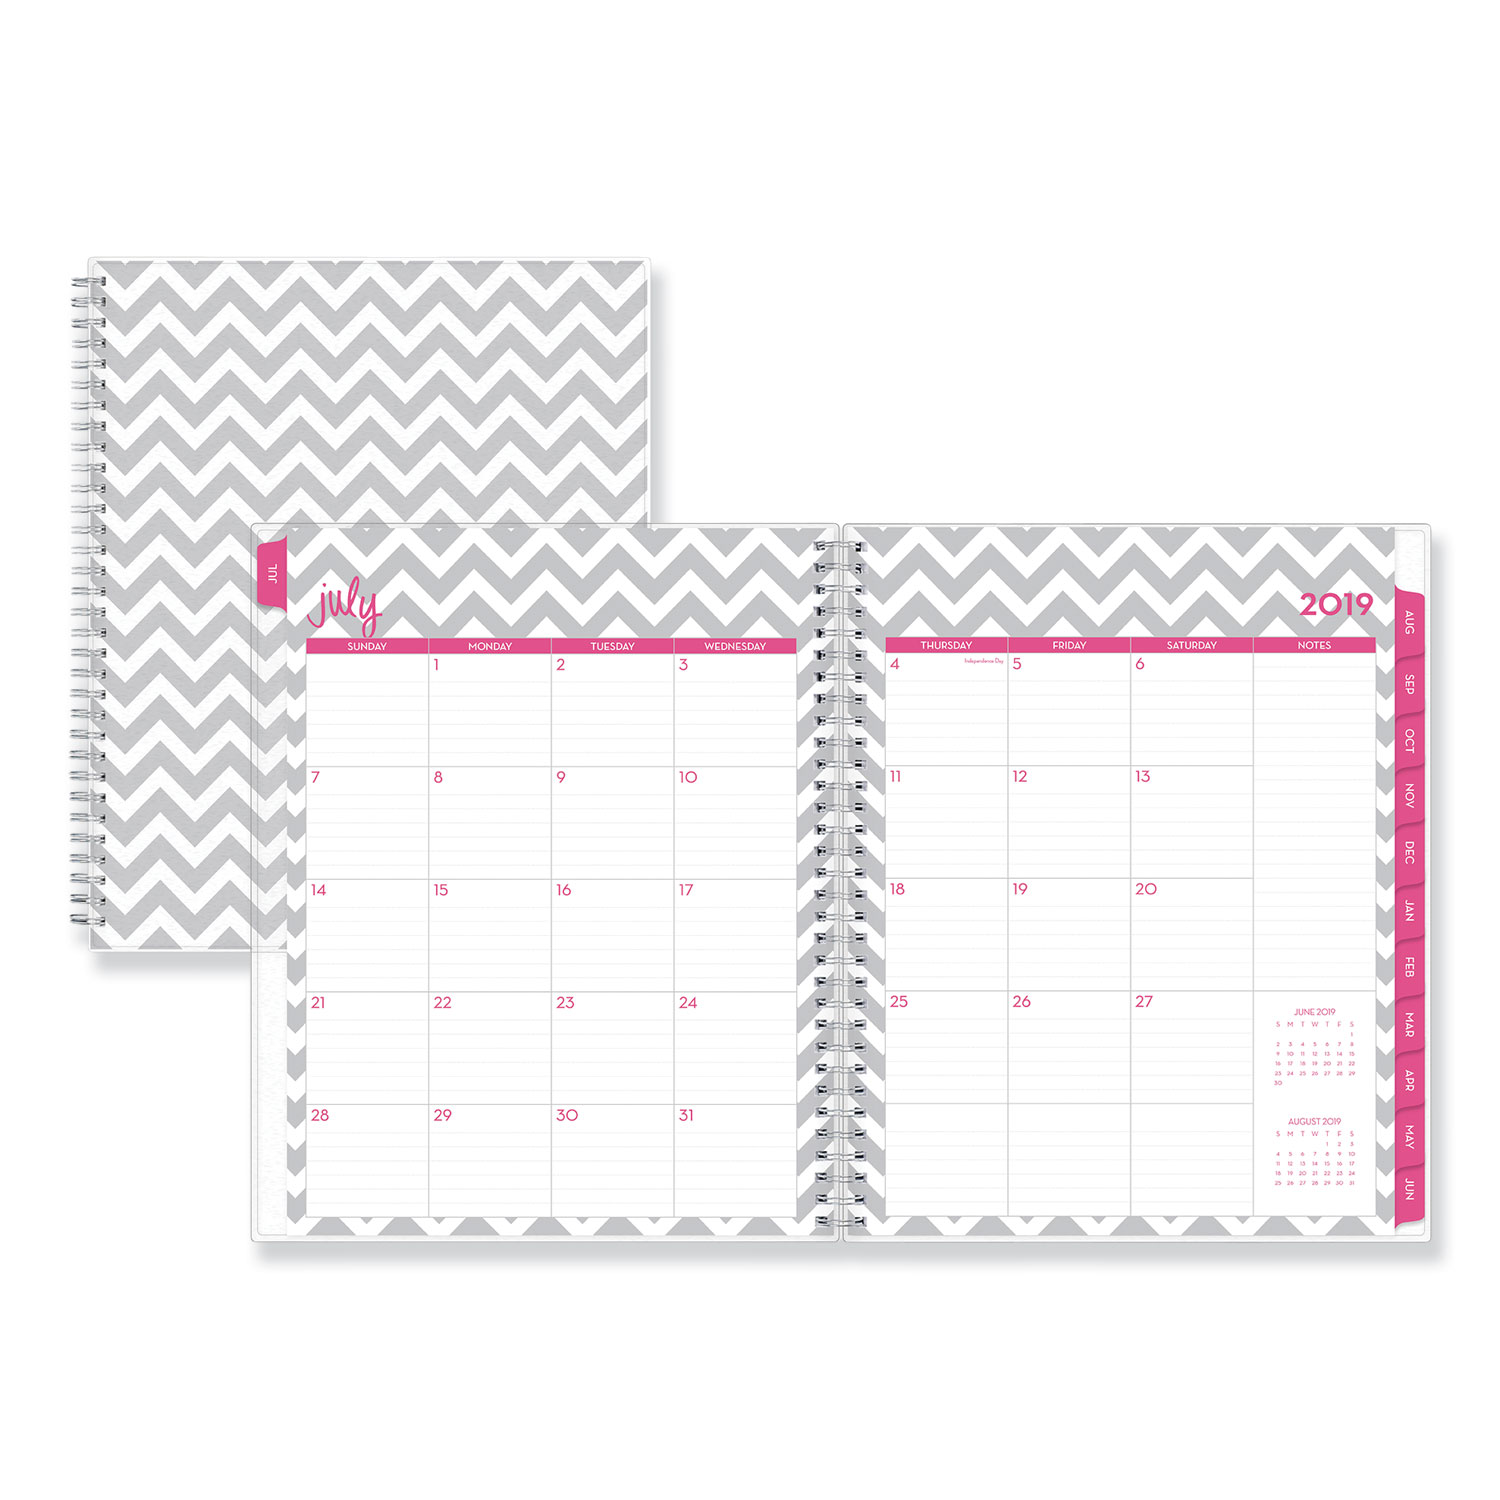  Blue Sky 100287 Dabney Lee Ollie Academic Weekly/Monthly Planner, Gray Chevron, 8.5 x 11, 2020-2021 (BLS100287) 